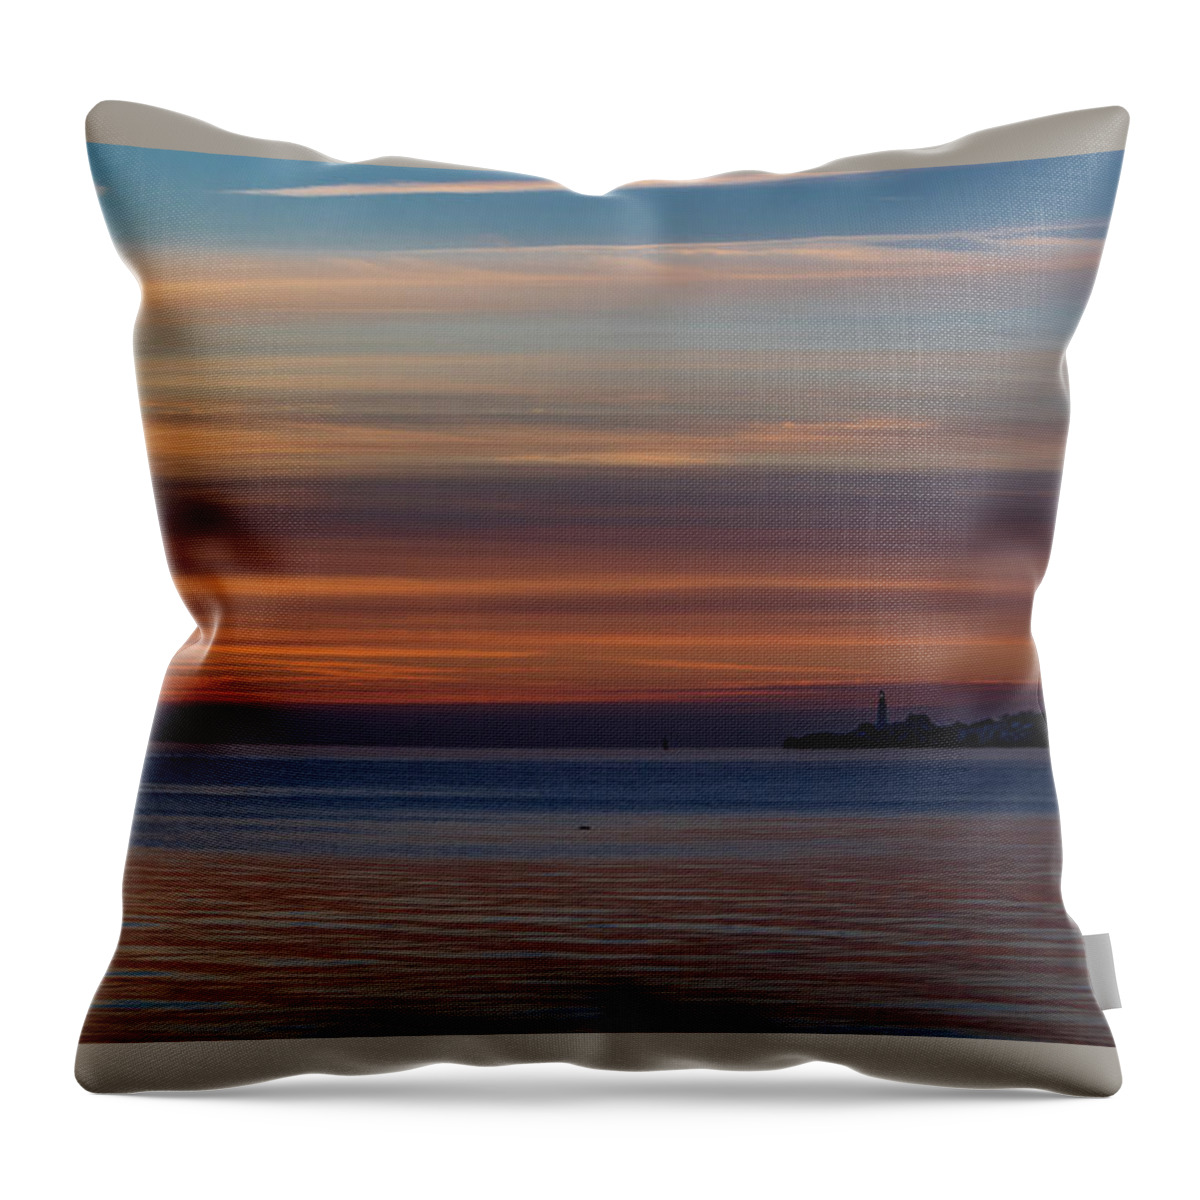 Landscape Throw Pillow featuring the photograph Morning Pastels by Darryl Hendricks